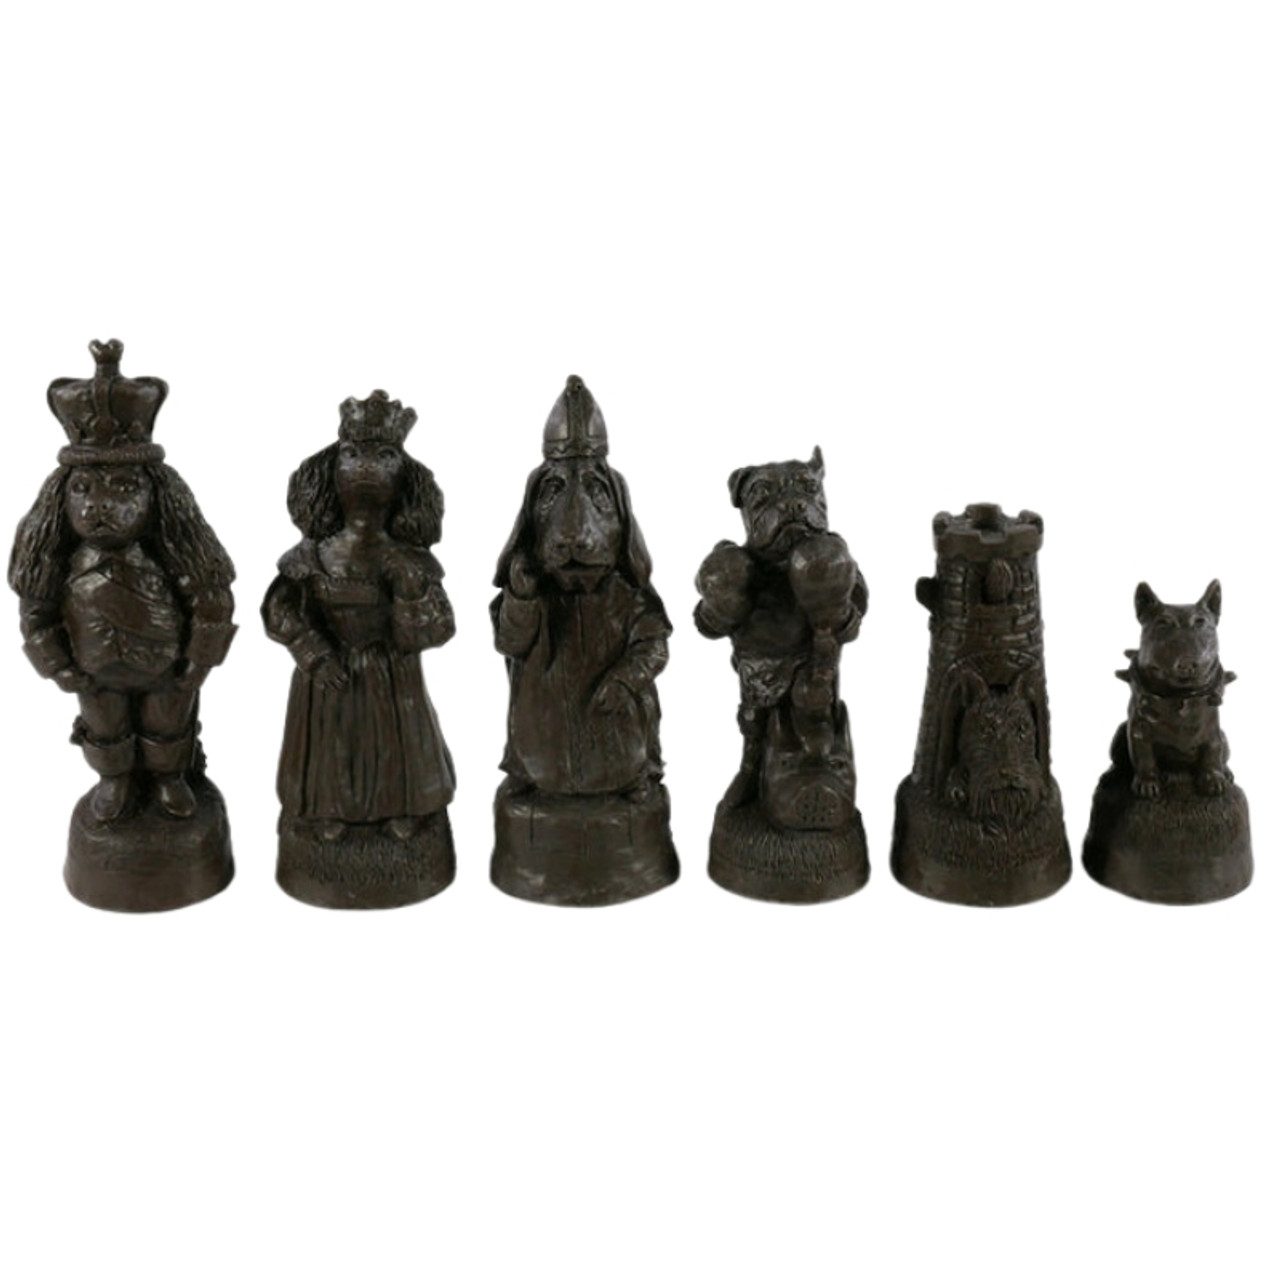 The Cats & Dogs Chess Pieces - Stone Resin with 4.5" King black pieces